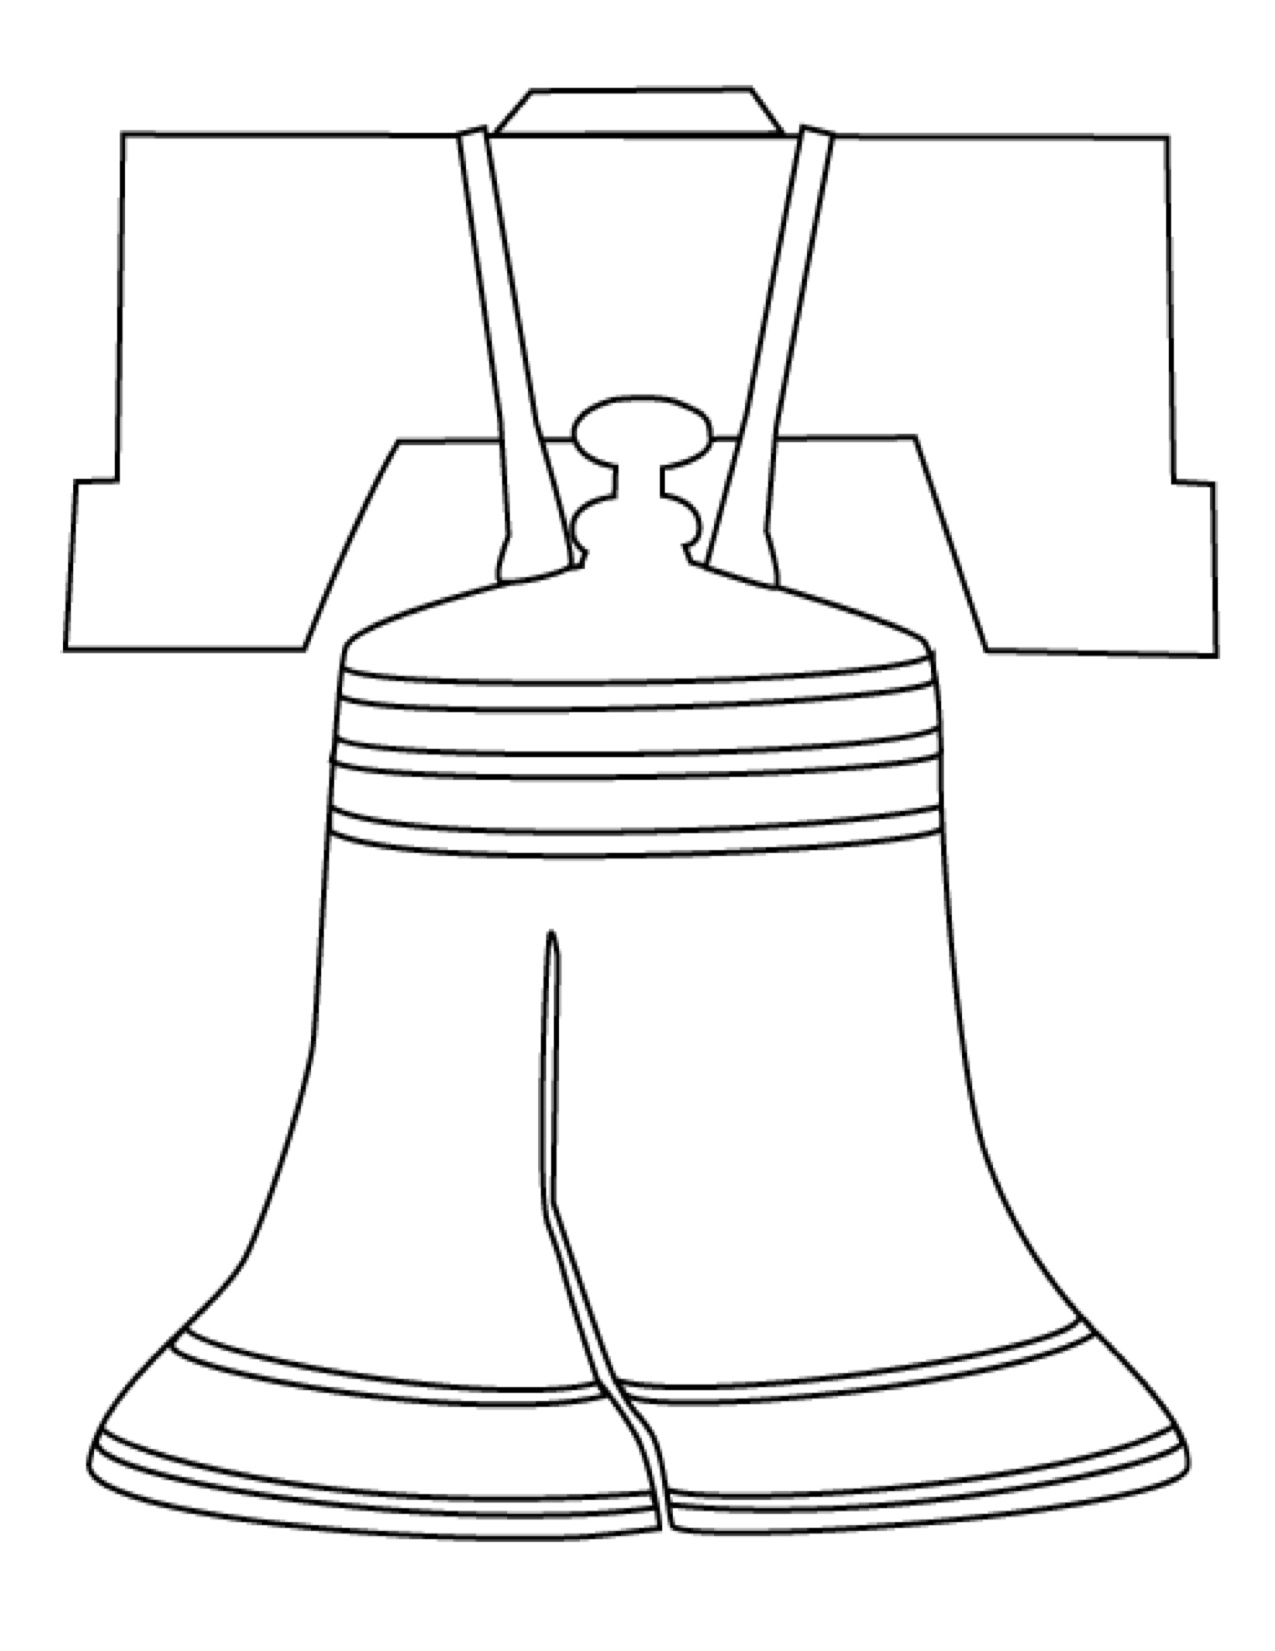 Learn to Draw a Christmas Bell in Easy Steps